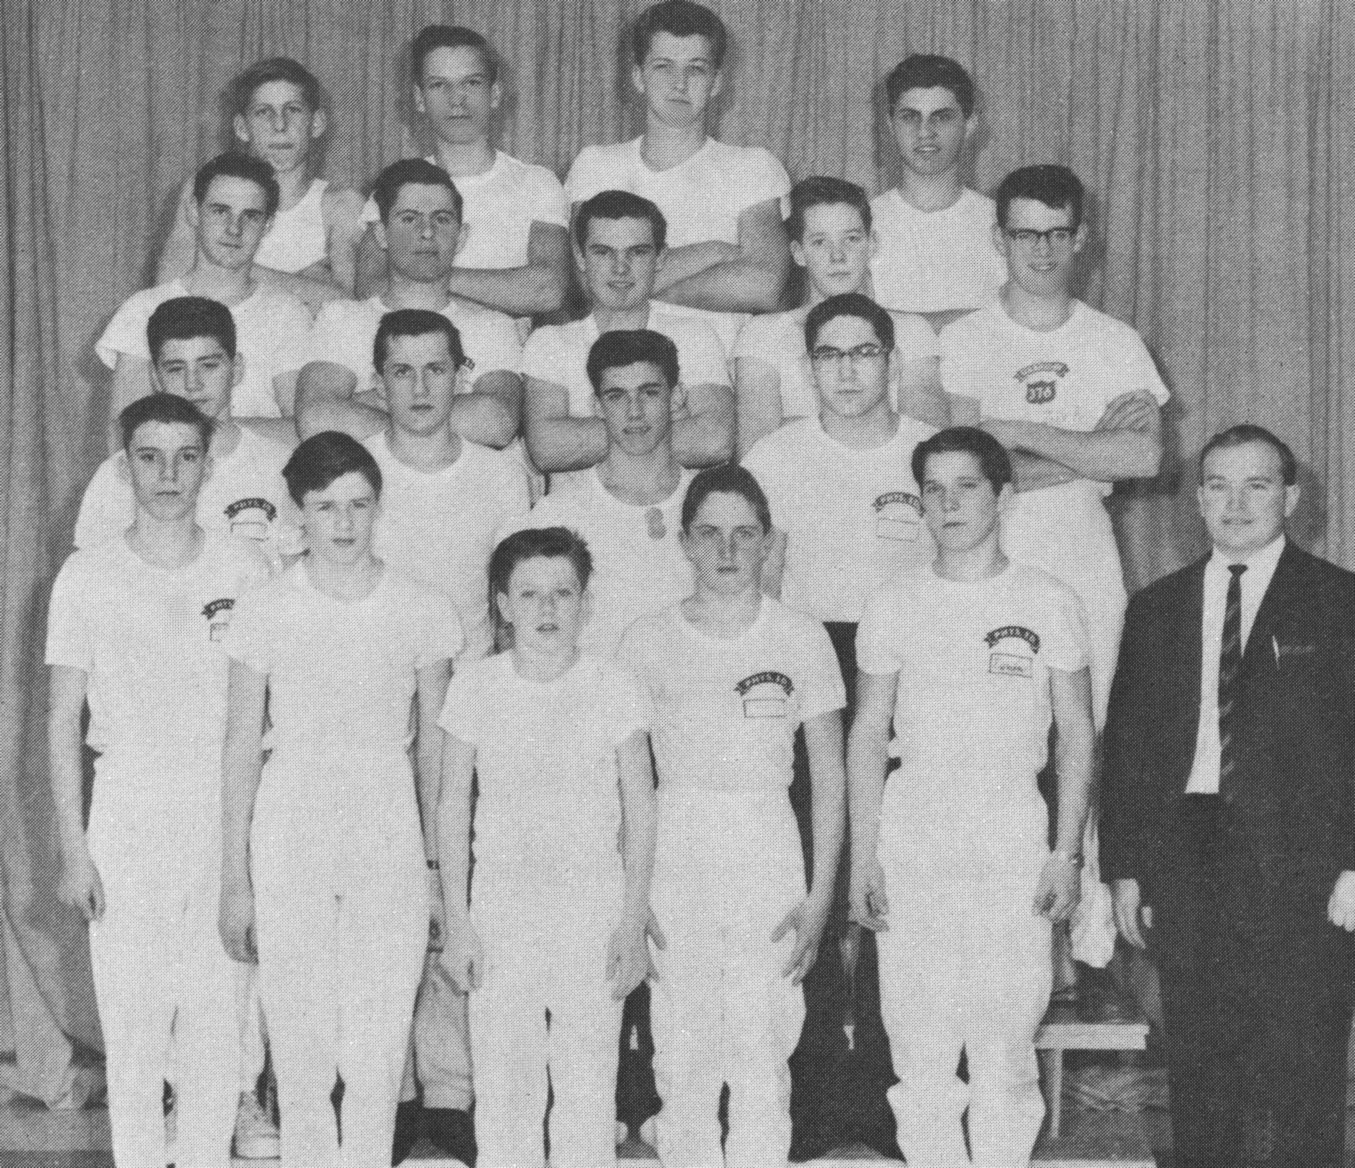 (Click to magnify) FRONT ROW: D. Uren, K. Gould, Brian Heddle, H. Assinck, E. Woods, Mr. Vince Cascone (coach ... previously was a player on Waterloo Lutheran's university football team); SECOND ROW: T. Cox, W. Postill, G. Redshaw, Colin McGillivray; THIR